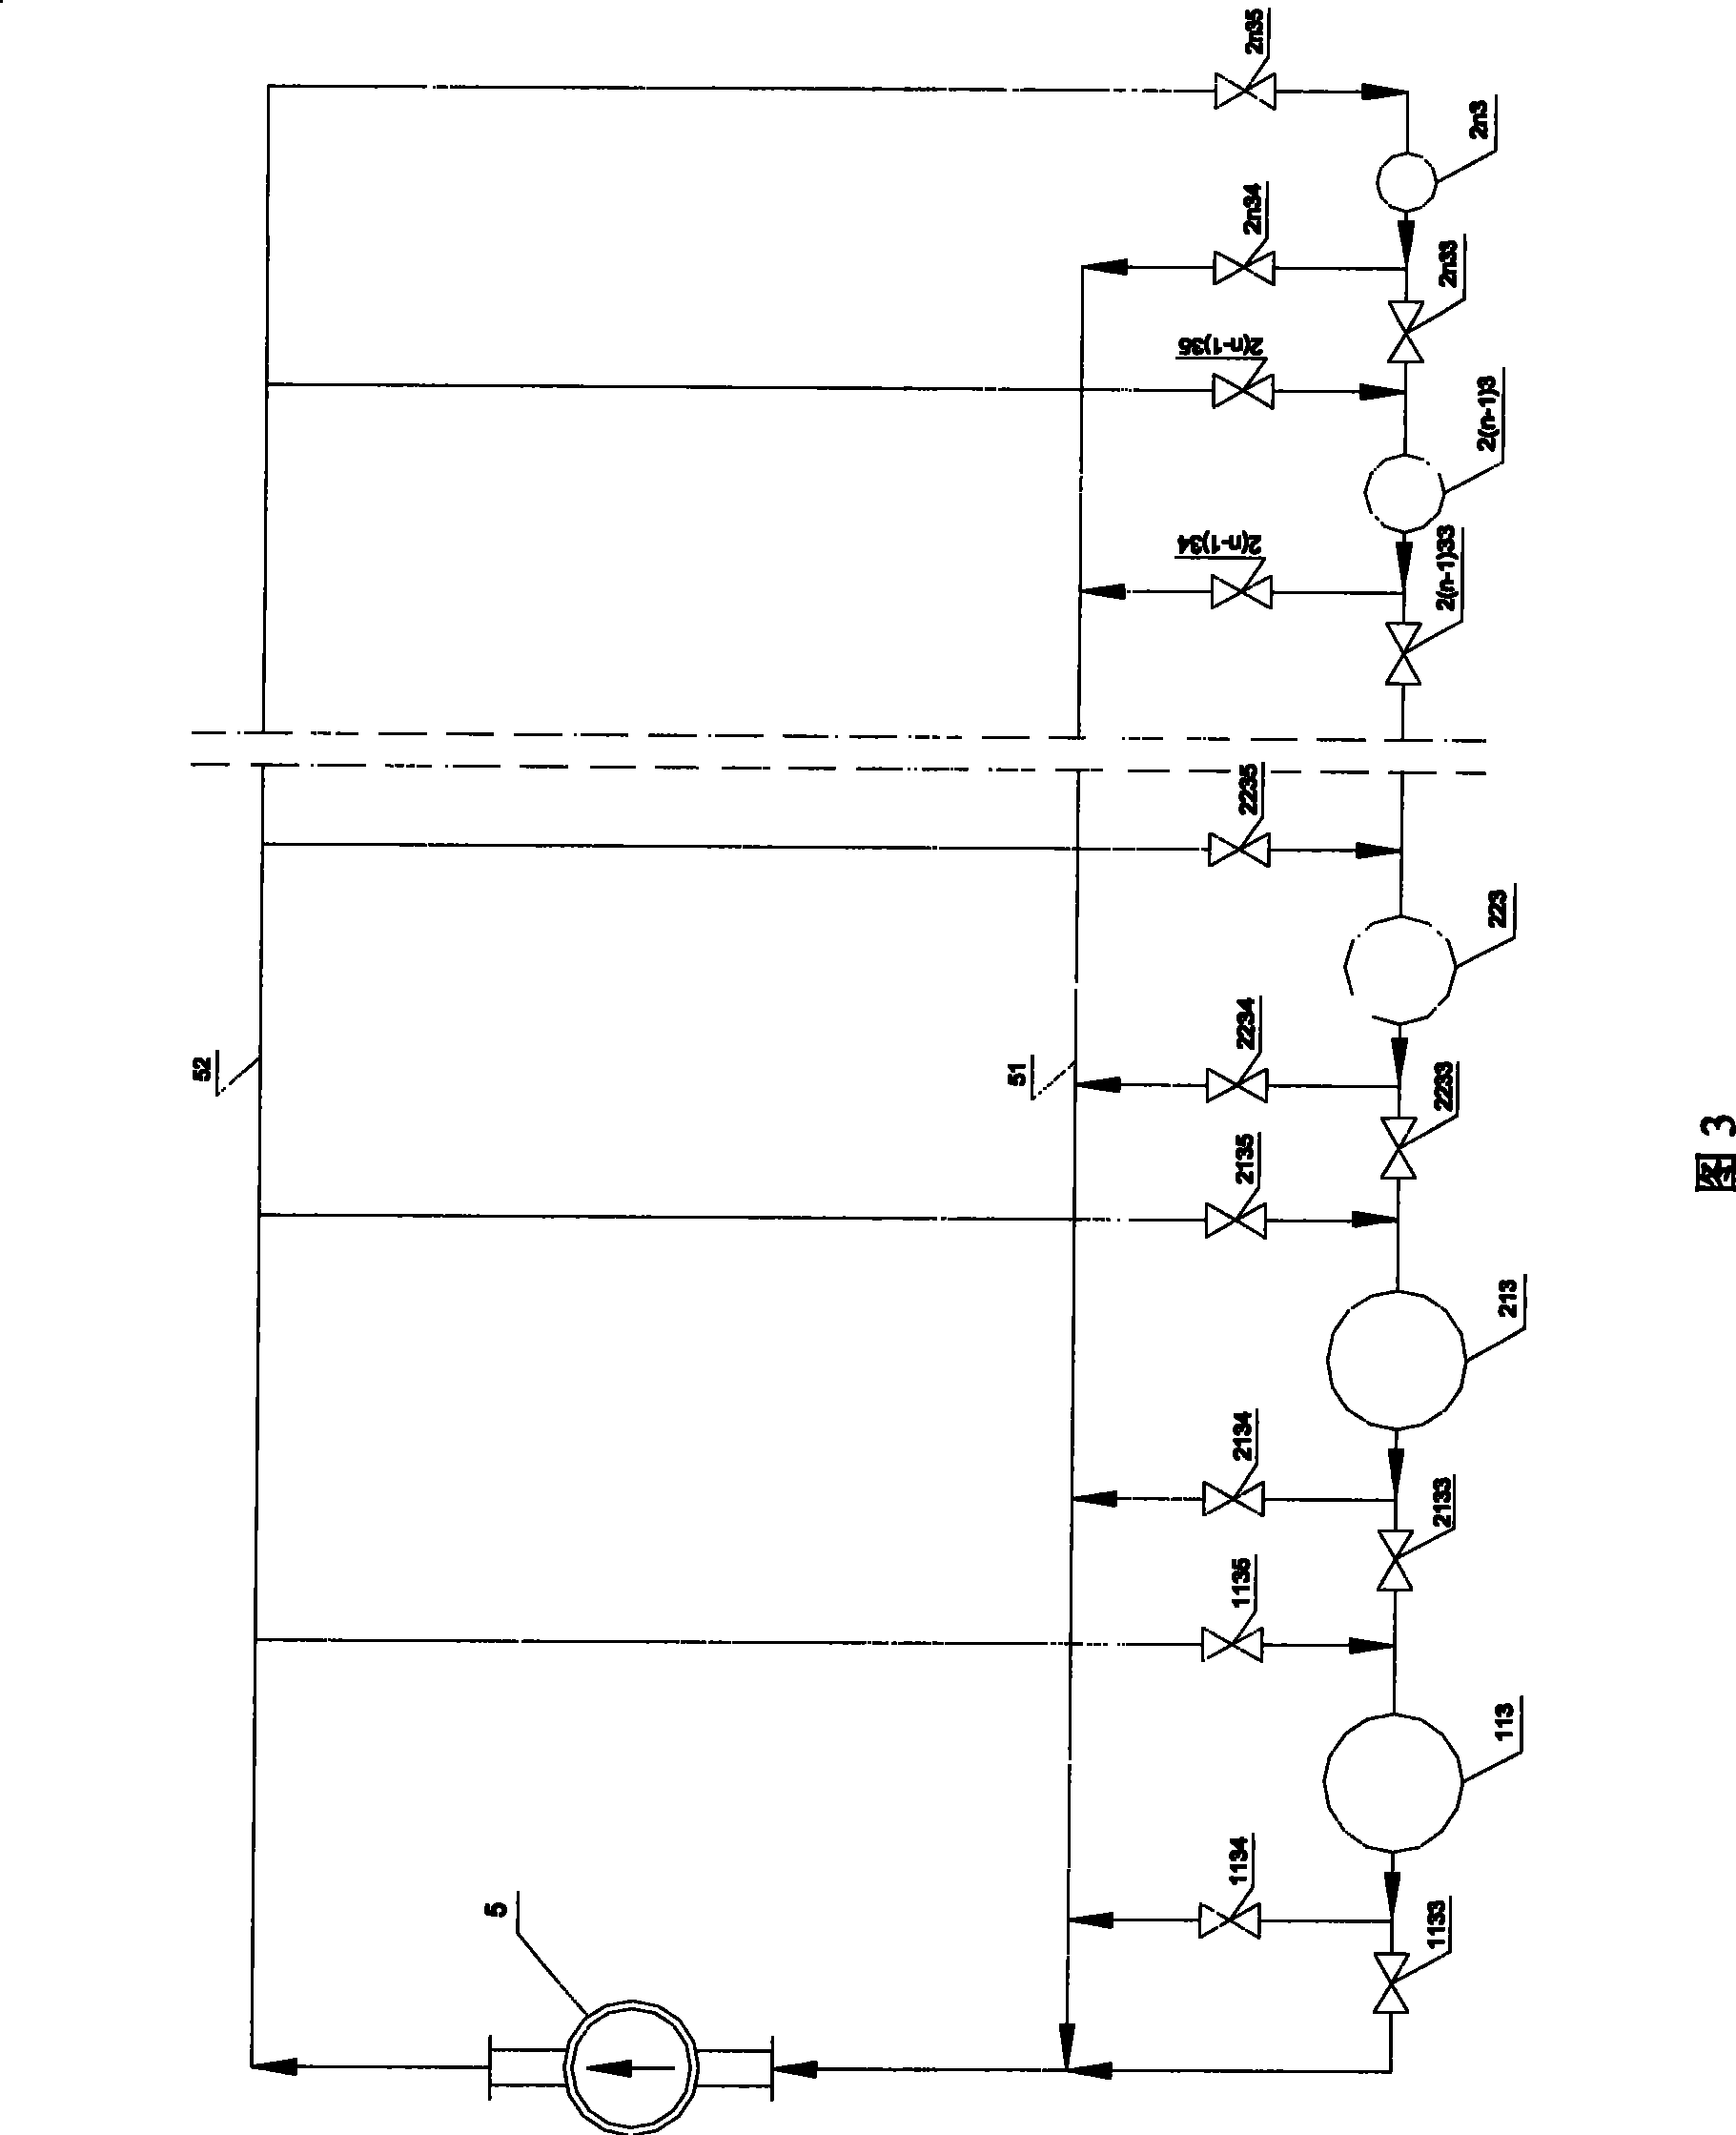 Method and system for producing high concentration carbon dioxide of carbon-13